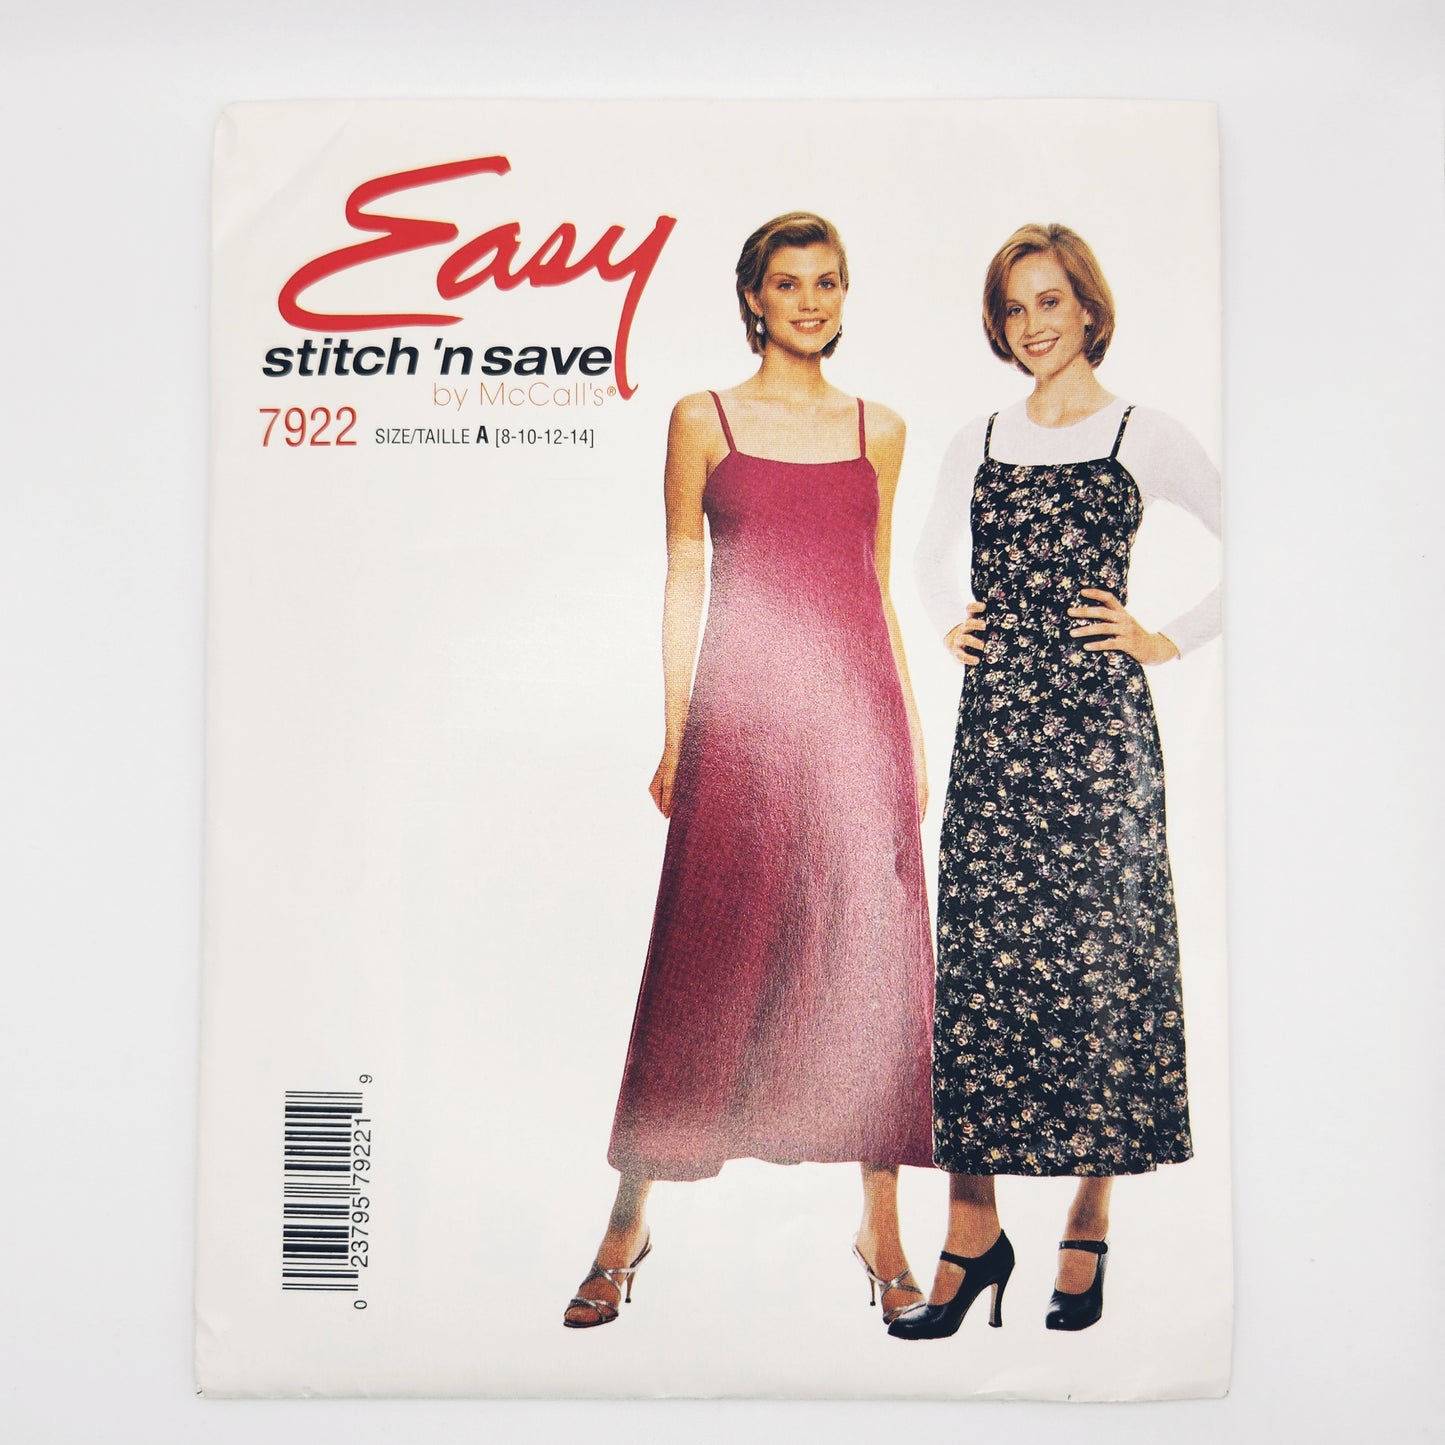 1995 McCall's Pattern 7922 Misses Dress Size 8-10-12-14